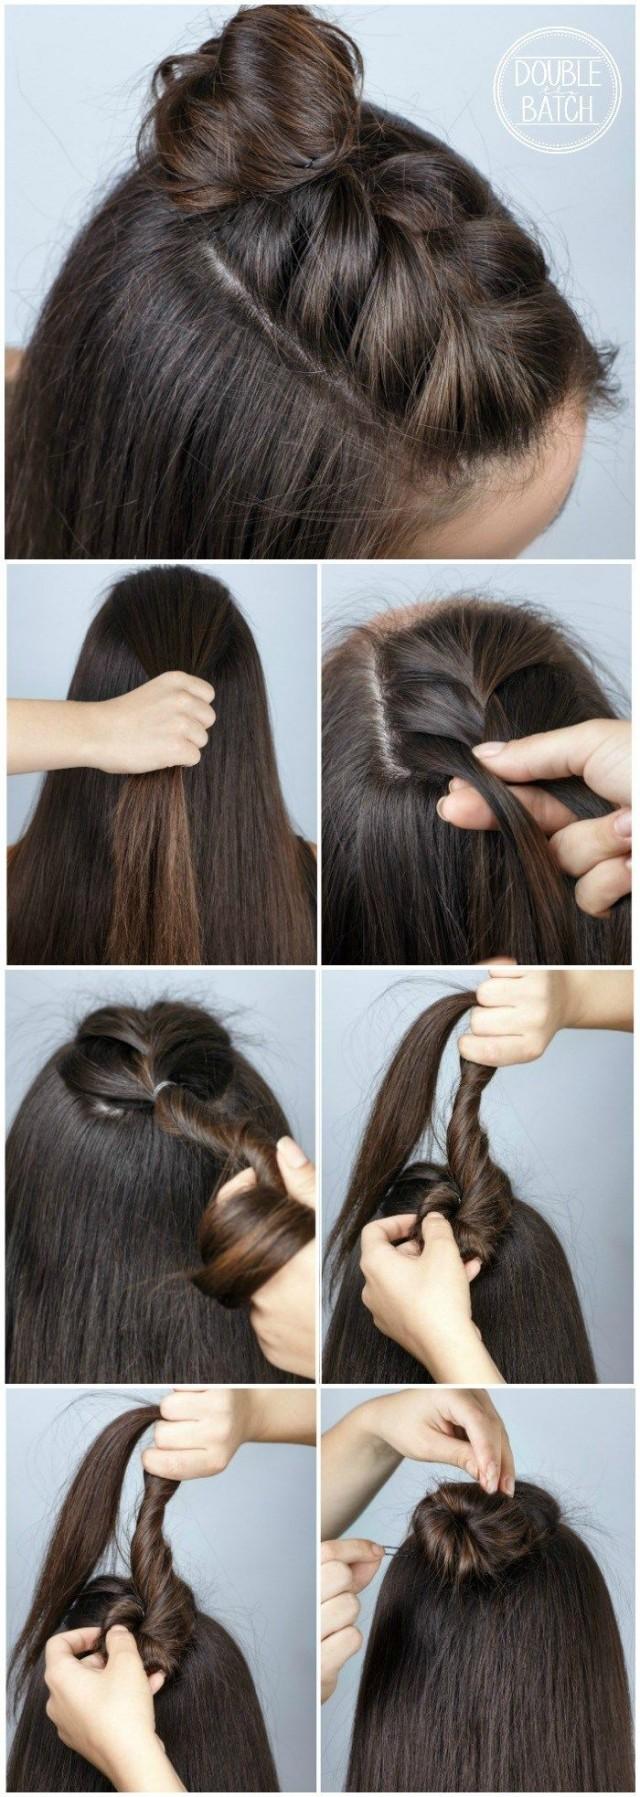 Fun Way To Change Up Your Hair! Cute Half Braid! Love This Easy Hairstyle 